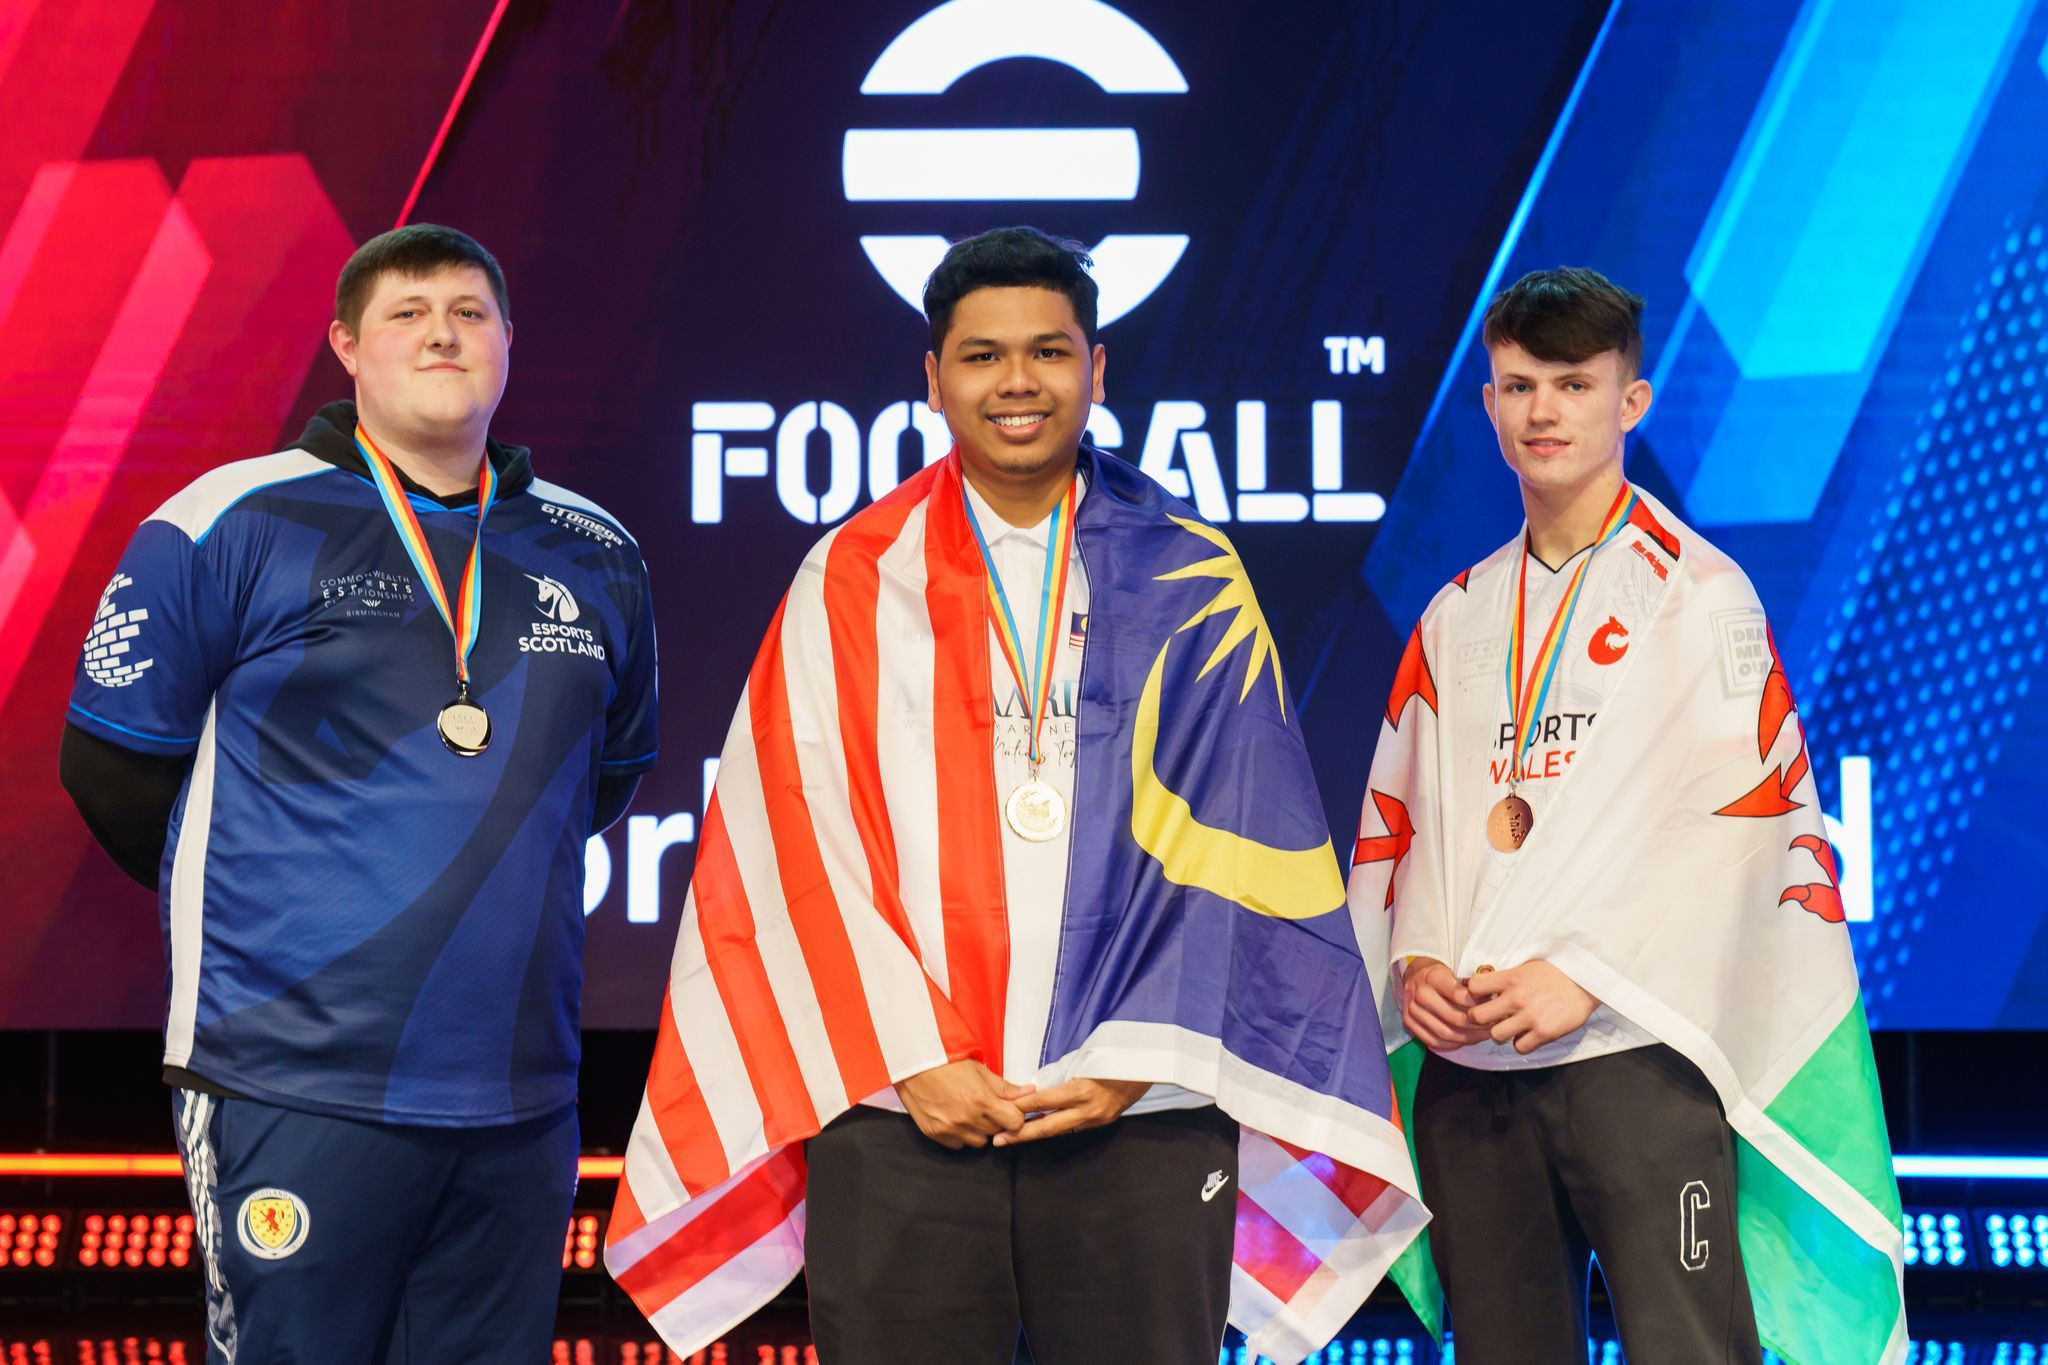 Scotland's BigStuff, left, and Wales' CerithDennis completed the eFootball open podium ©GEF